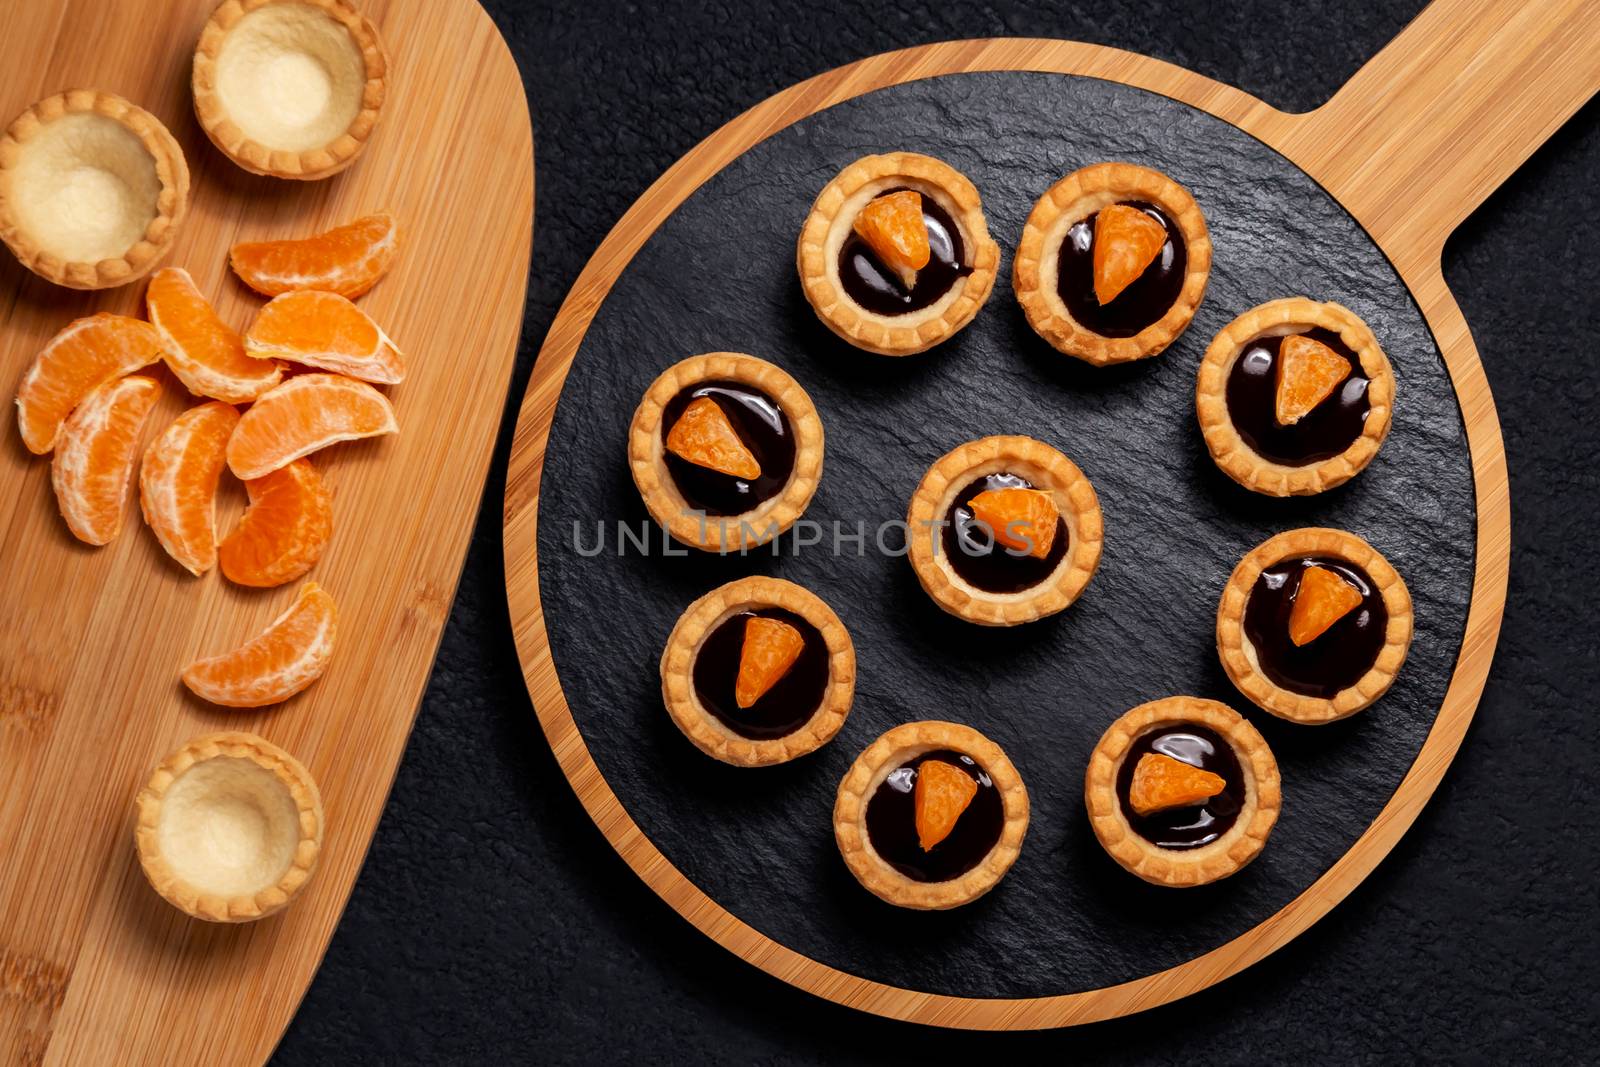 Sweet tartlets with chocolate and slices of tangerine on a dish of natural slate for serving, top view.